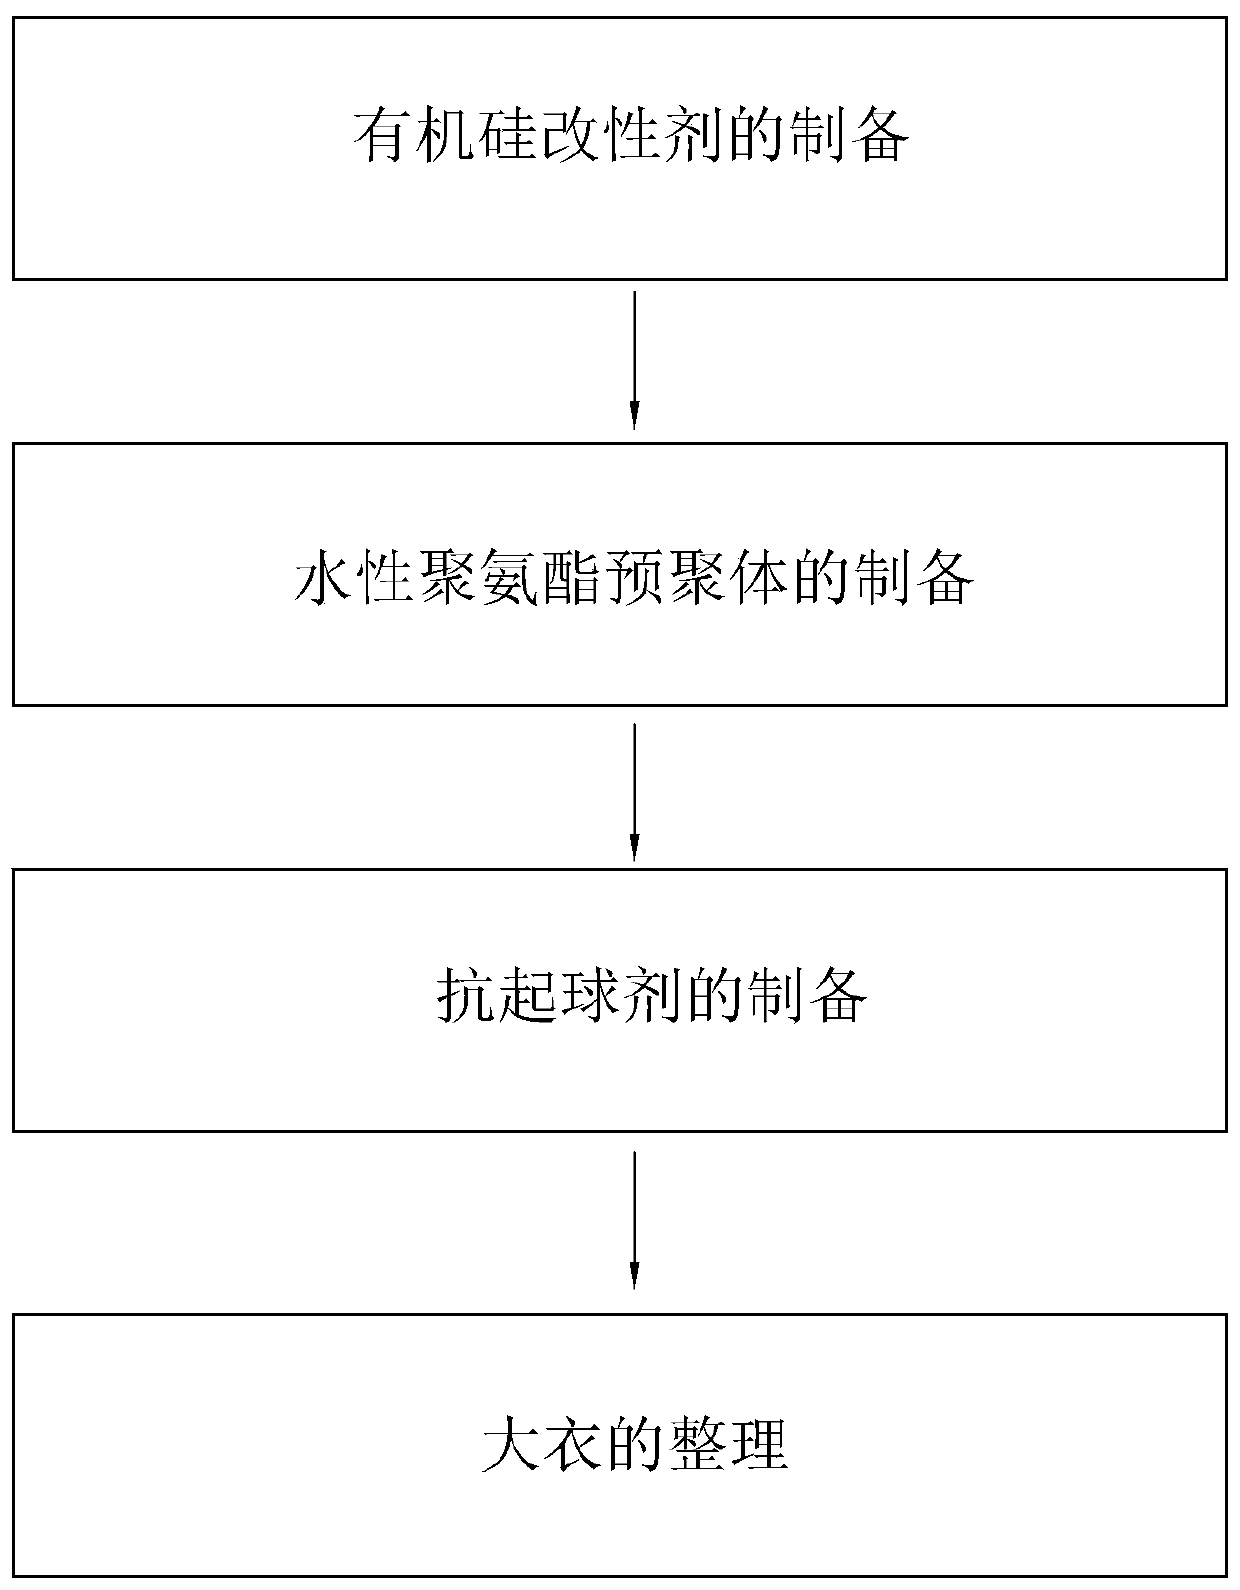 Anti-pilling overcoat and treatment process thereof